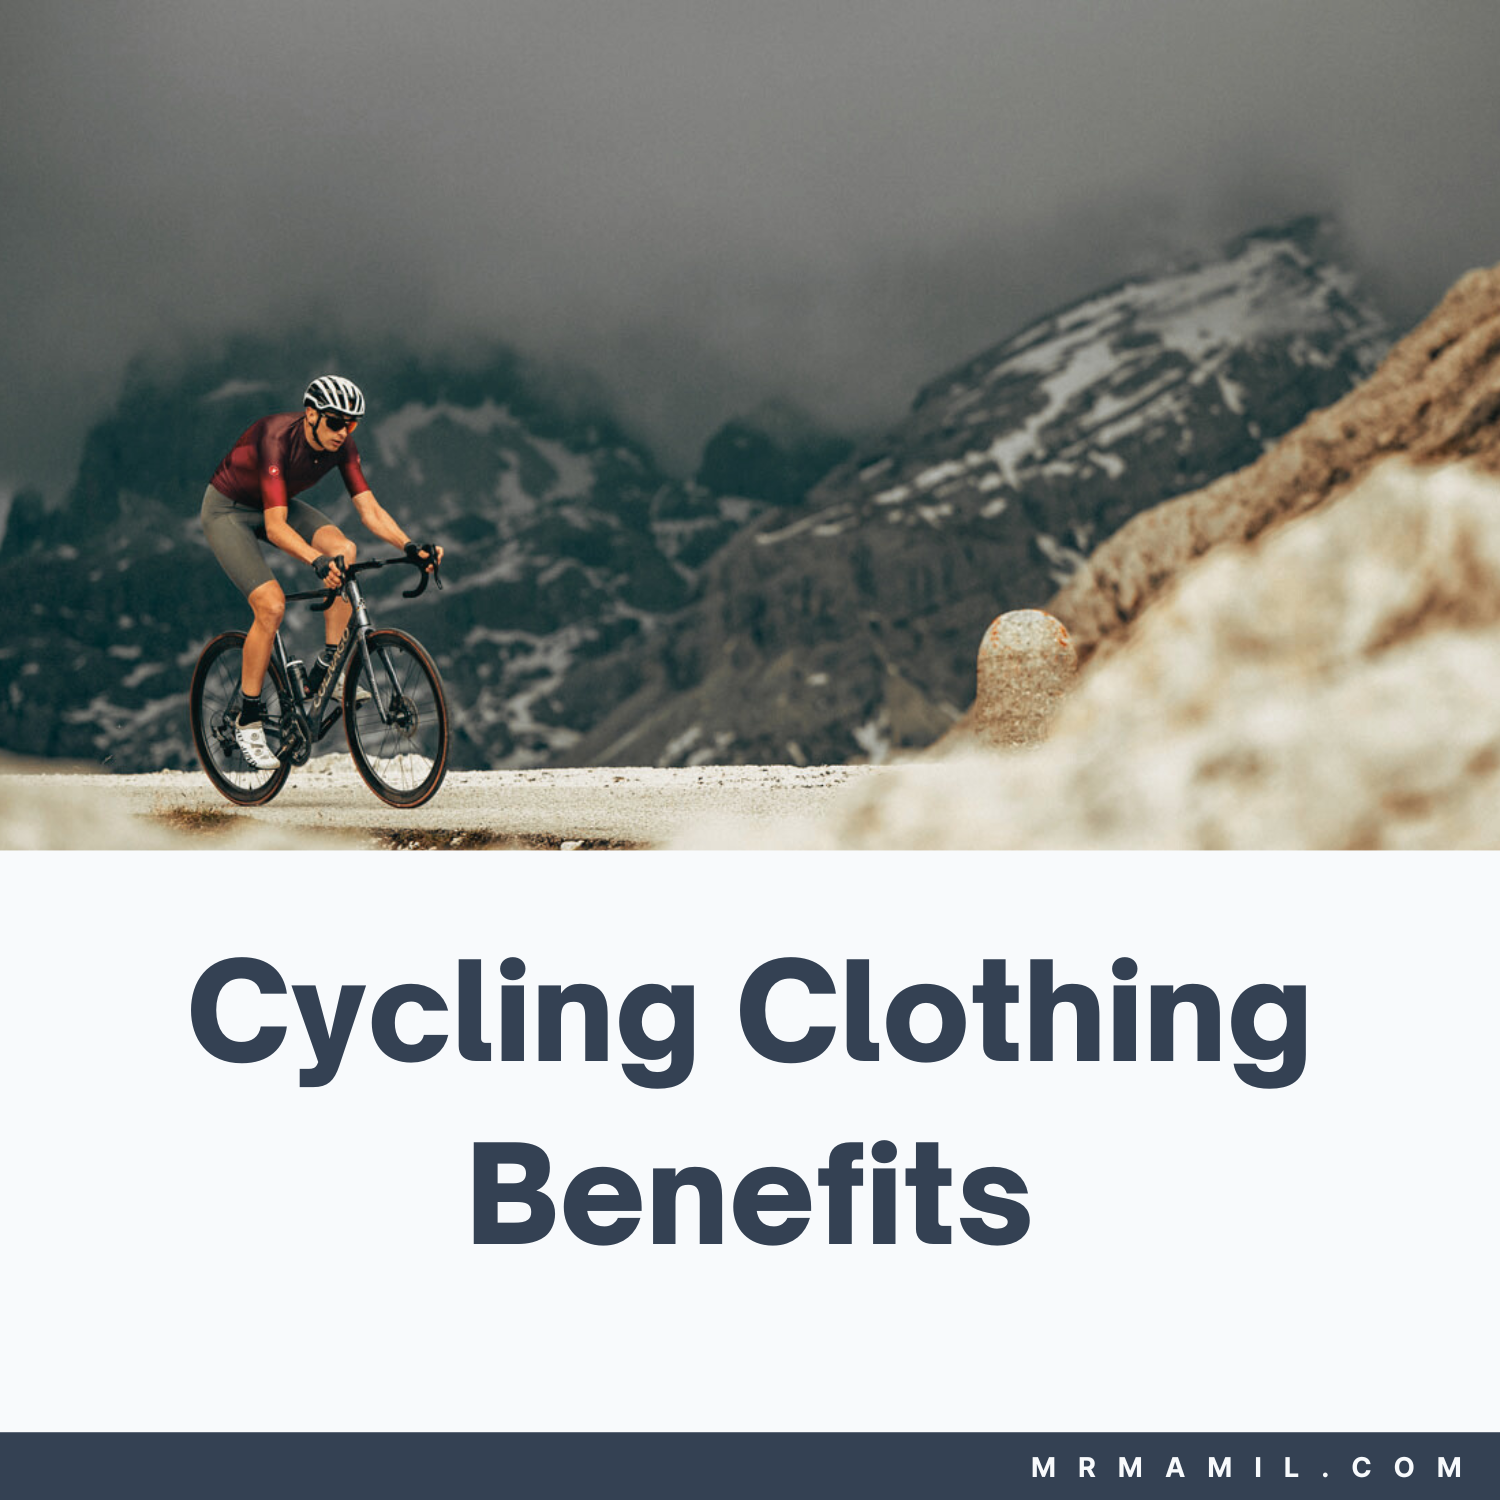 Benefits of Cycling Clothing